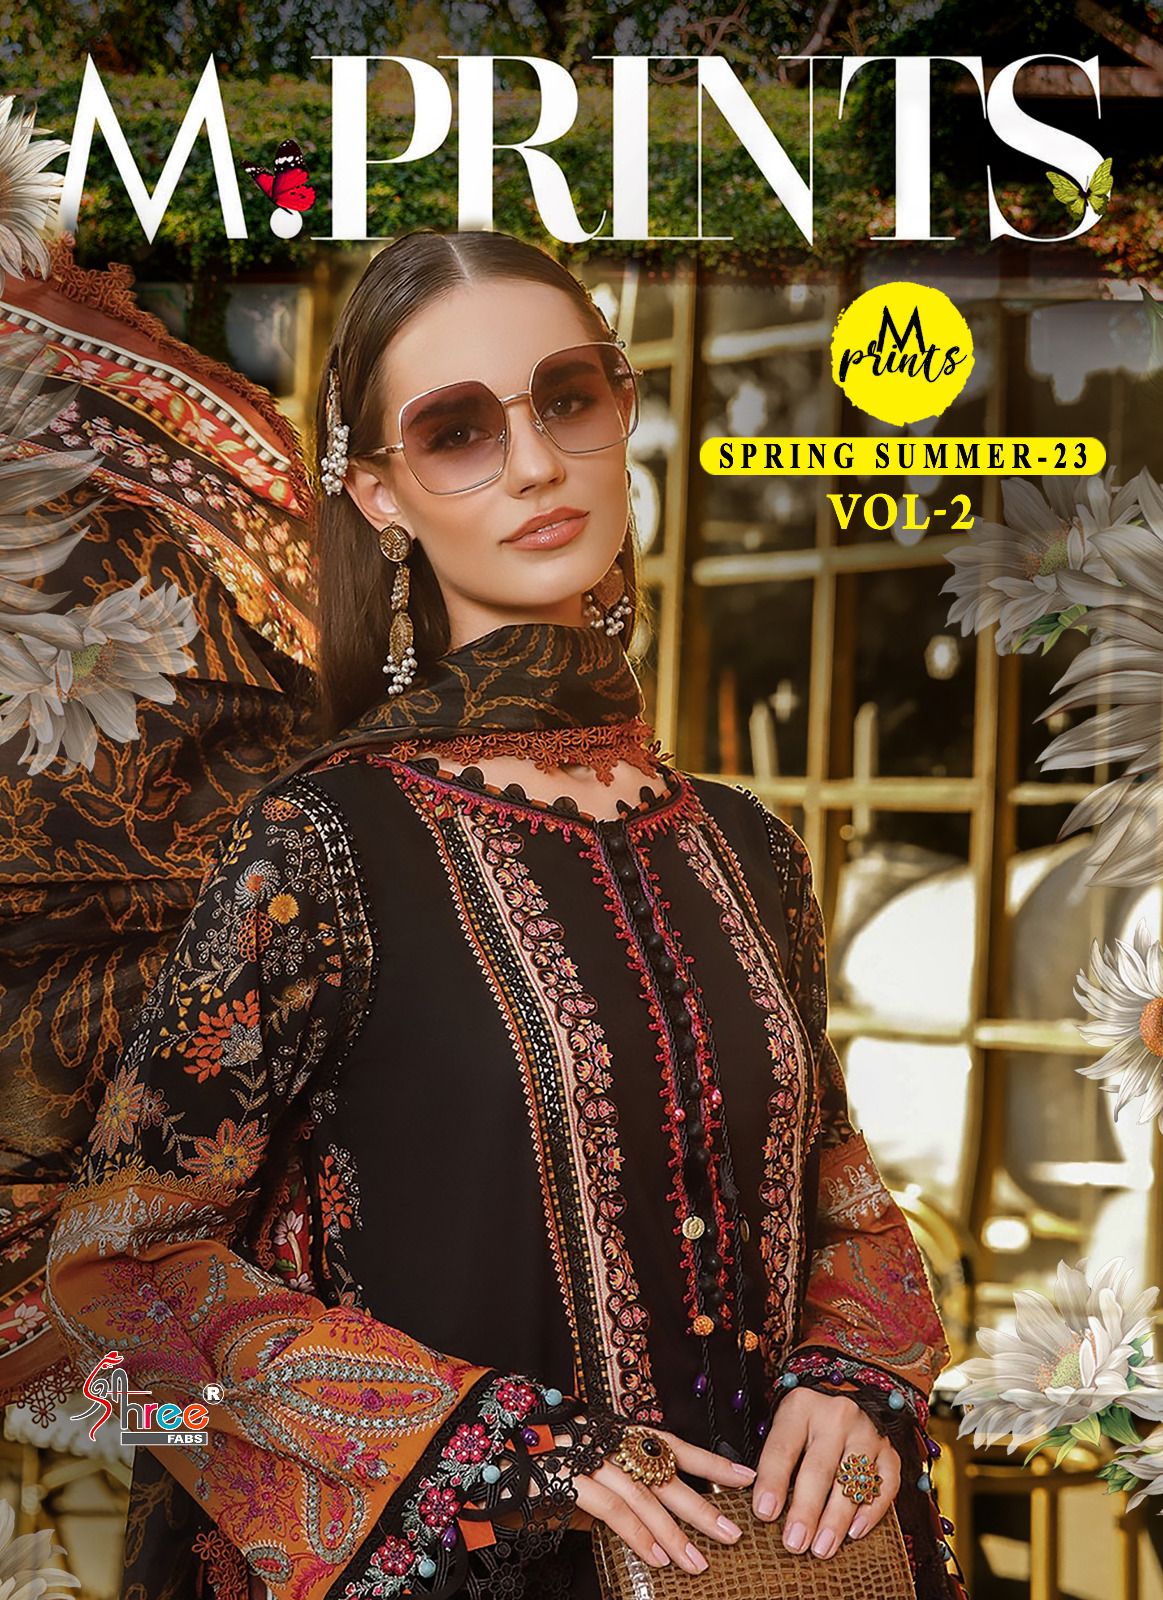 Shree Fabs M Prints Spring Summer - 23 Vol 2 Cotton With Embroidery Work Cotton Dupatta Salwar Suits At Wholesale Rate